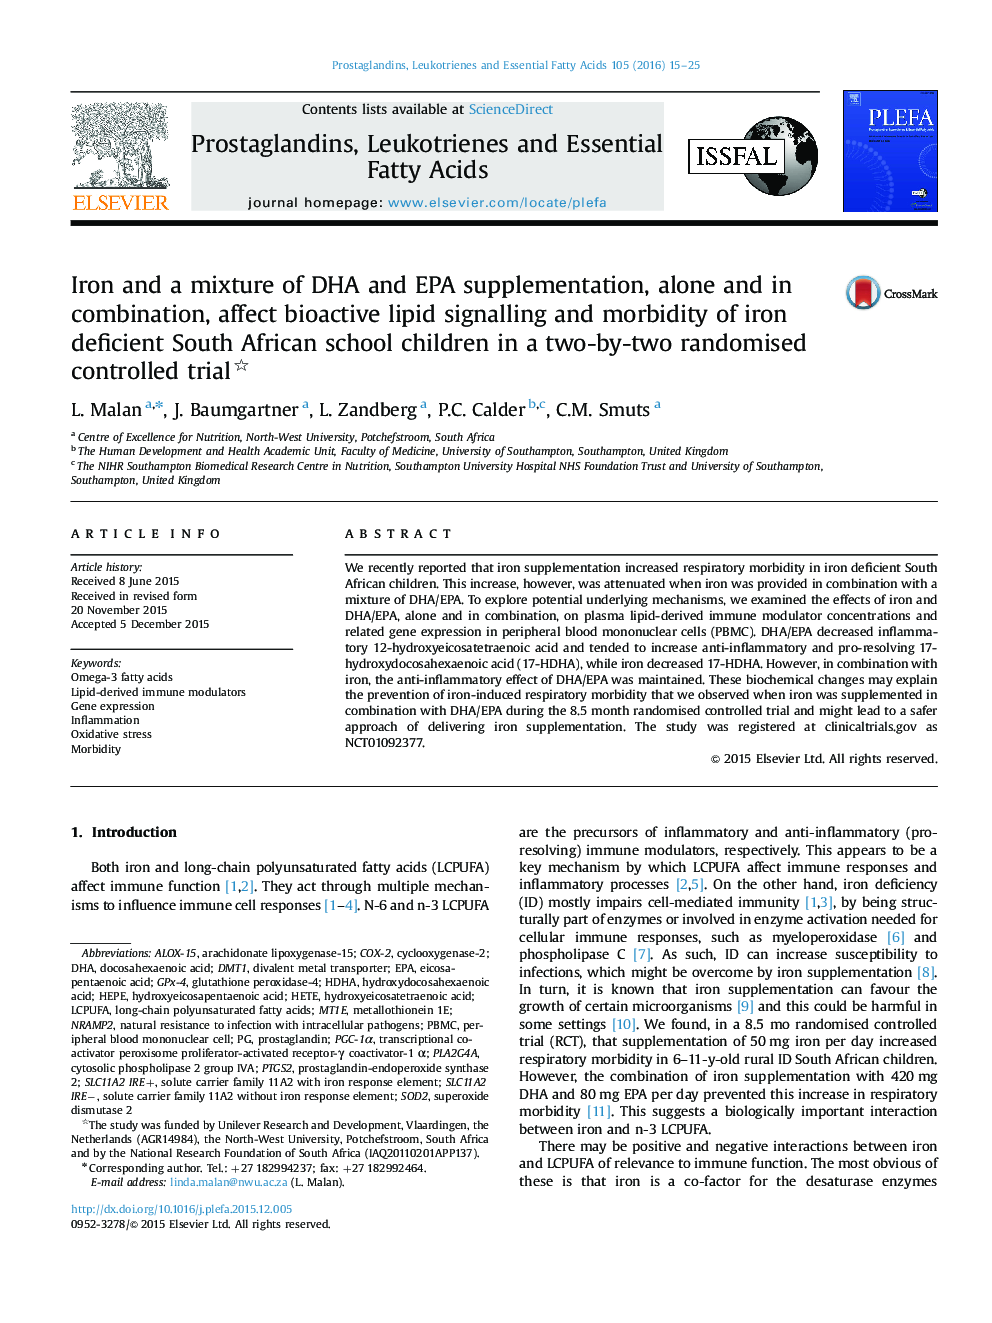 Iron and a mixture of DHA and EPA supplementation, alone and in combination, affect bioactive lipid signalling and morbidity of iron deficient South African school children in a two-by-two randomised controlled trial 